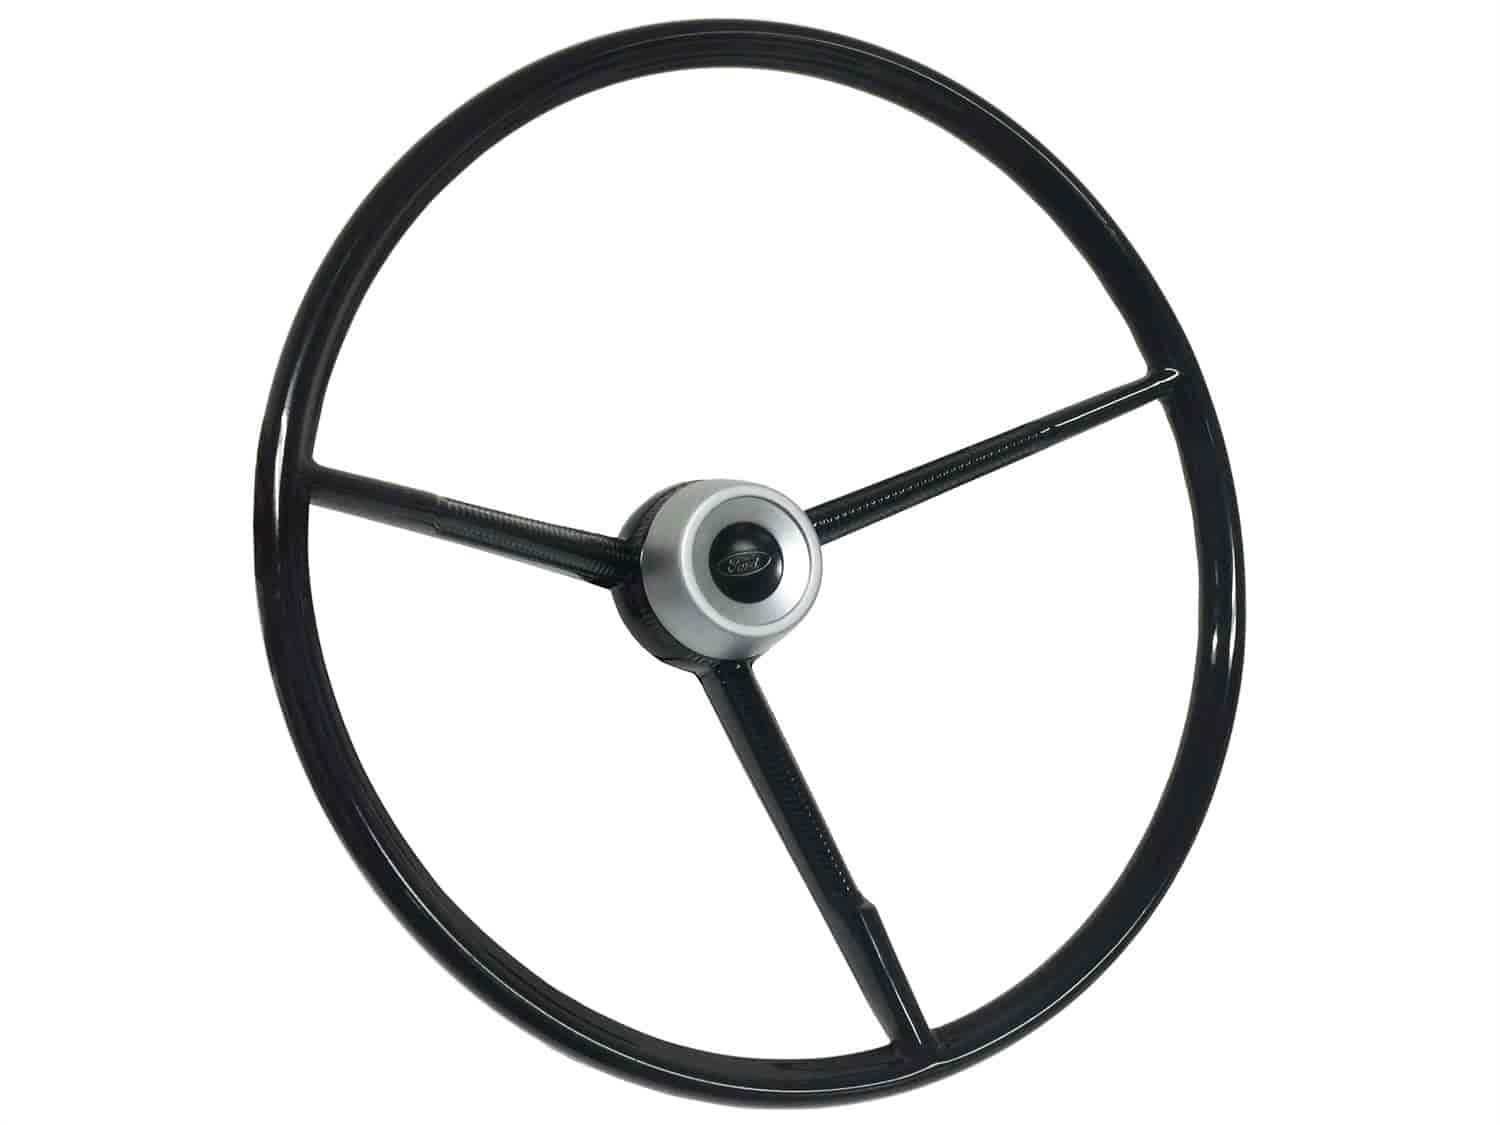 OE-Series Steering Wheel Kit 1960-71 Classic Ford, 17 in. Diameter, Gloss Black Finish, w/ Horn Button and Spring